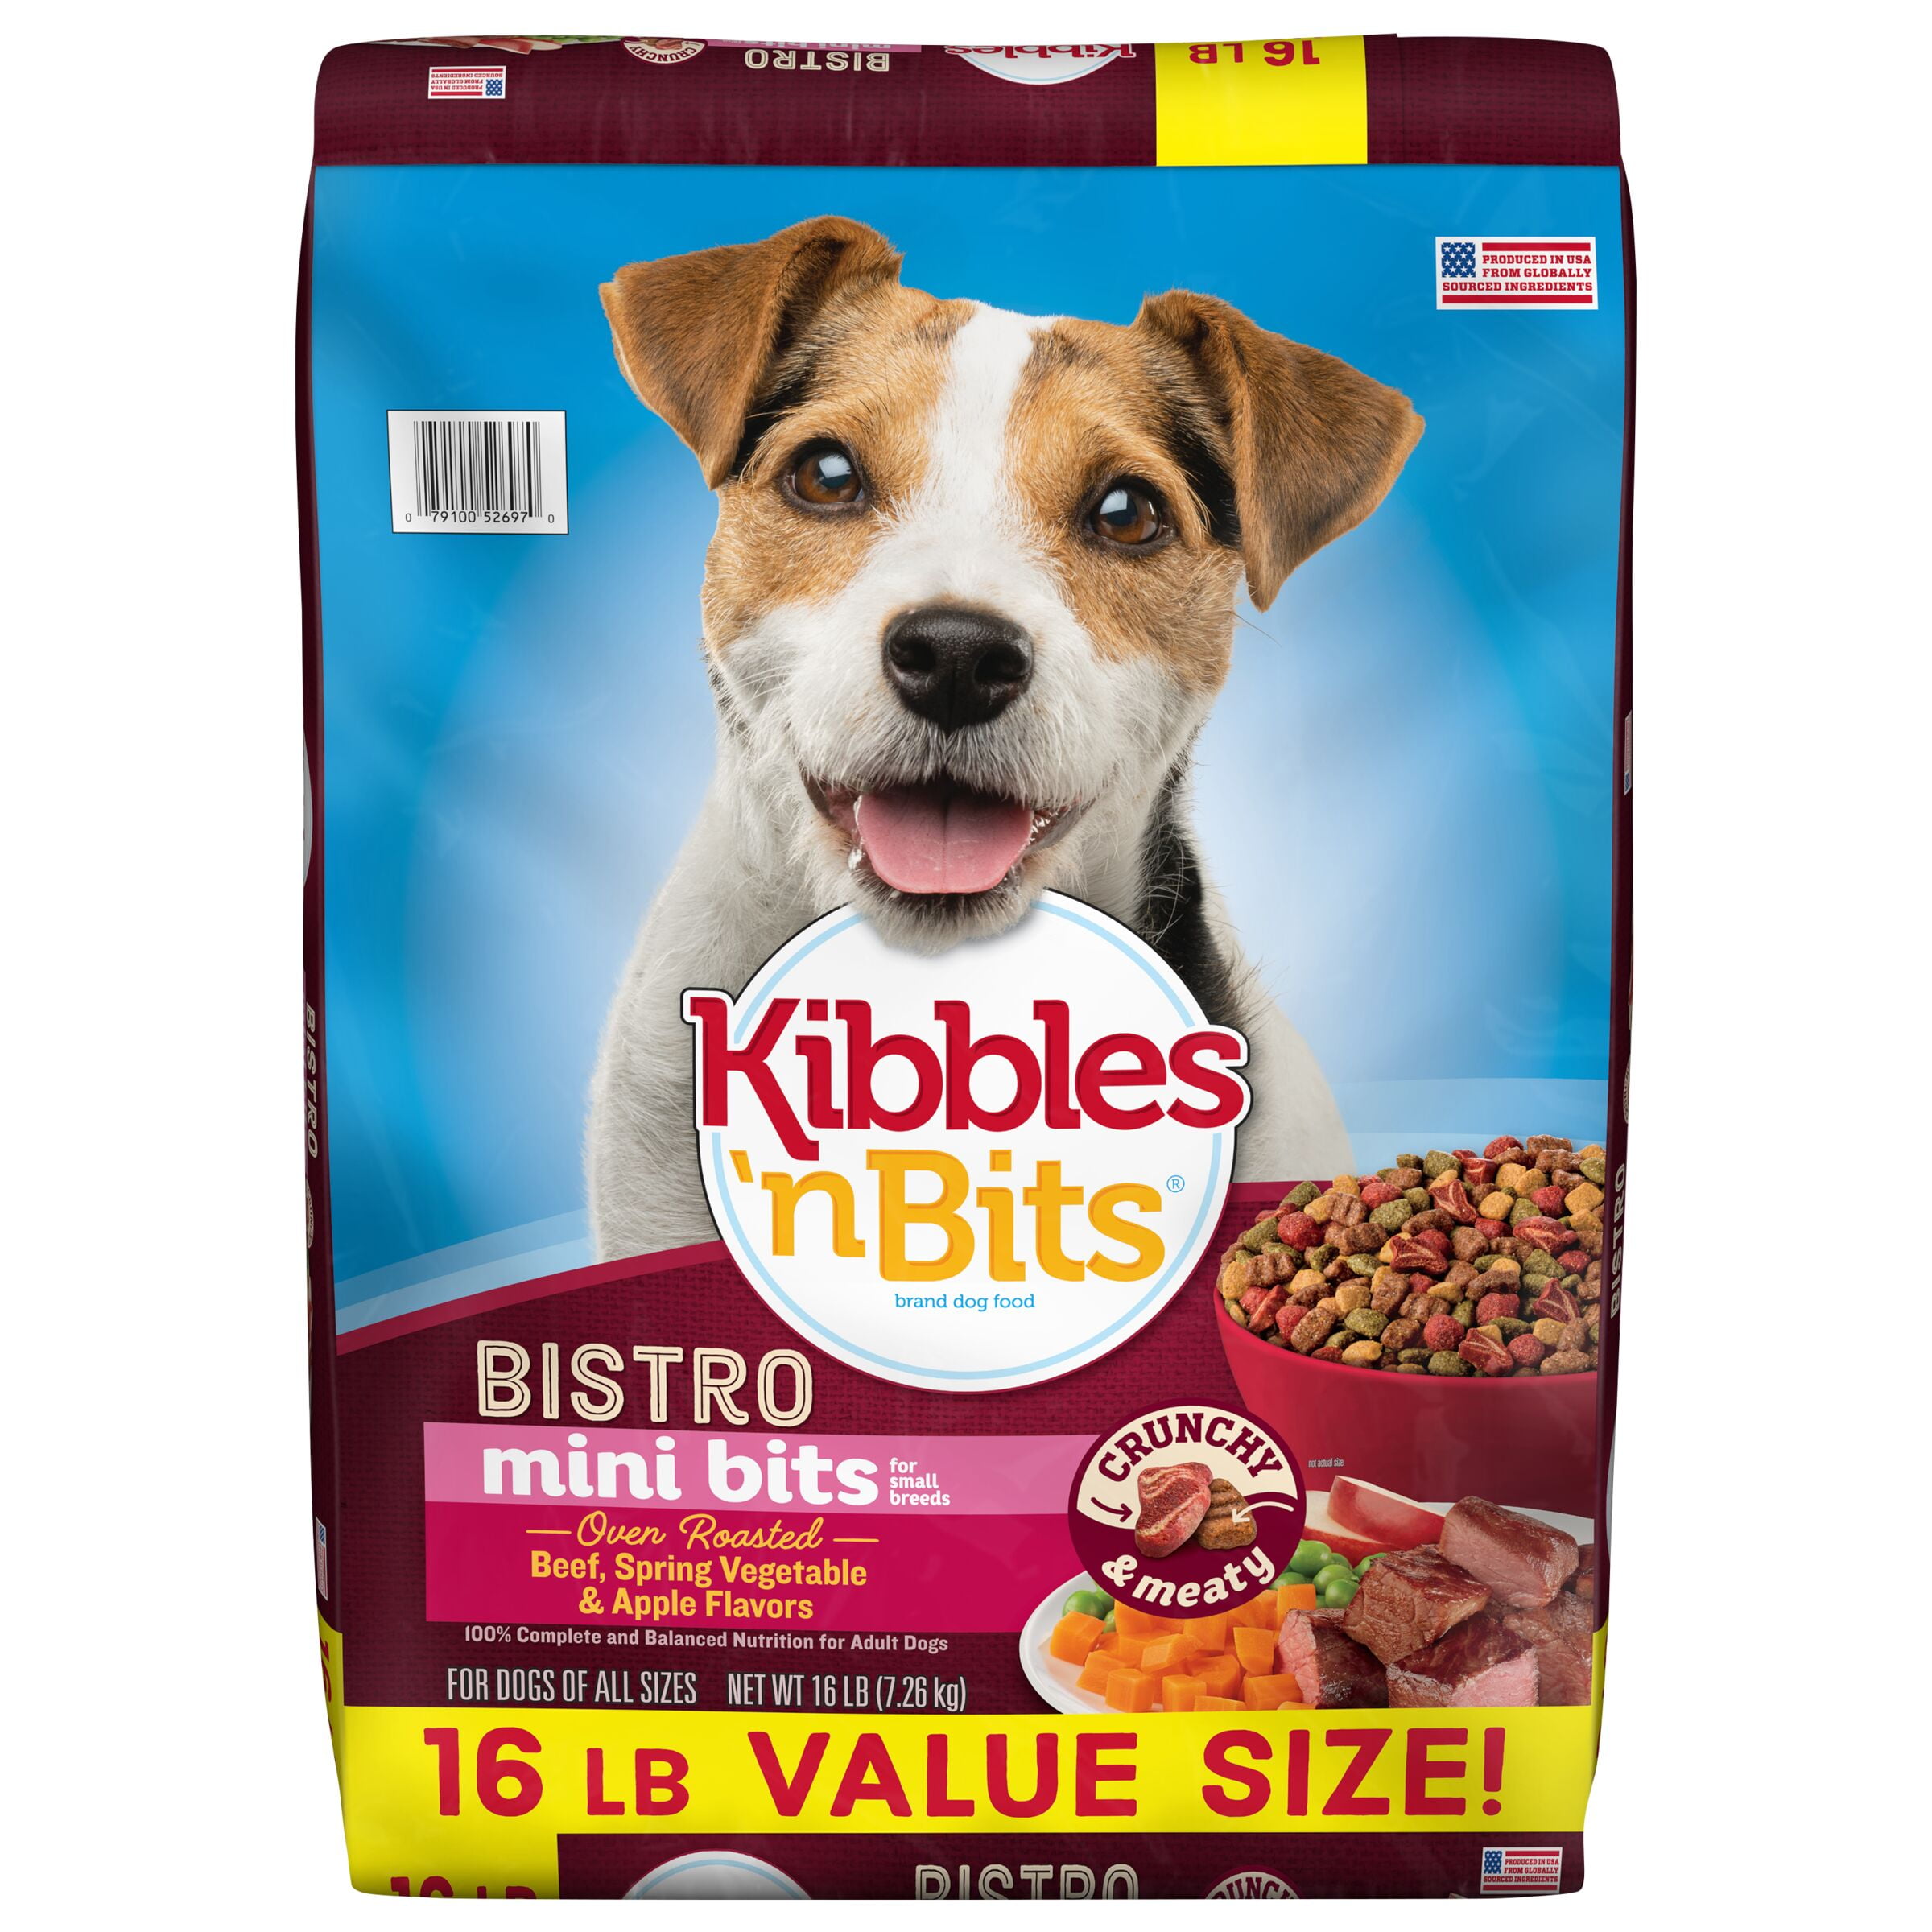 Kibbles 'n Bits Bistro Mini Bits Small Breed Oven Roasted Beef Flavor, 16-Pound